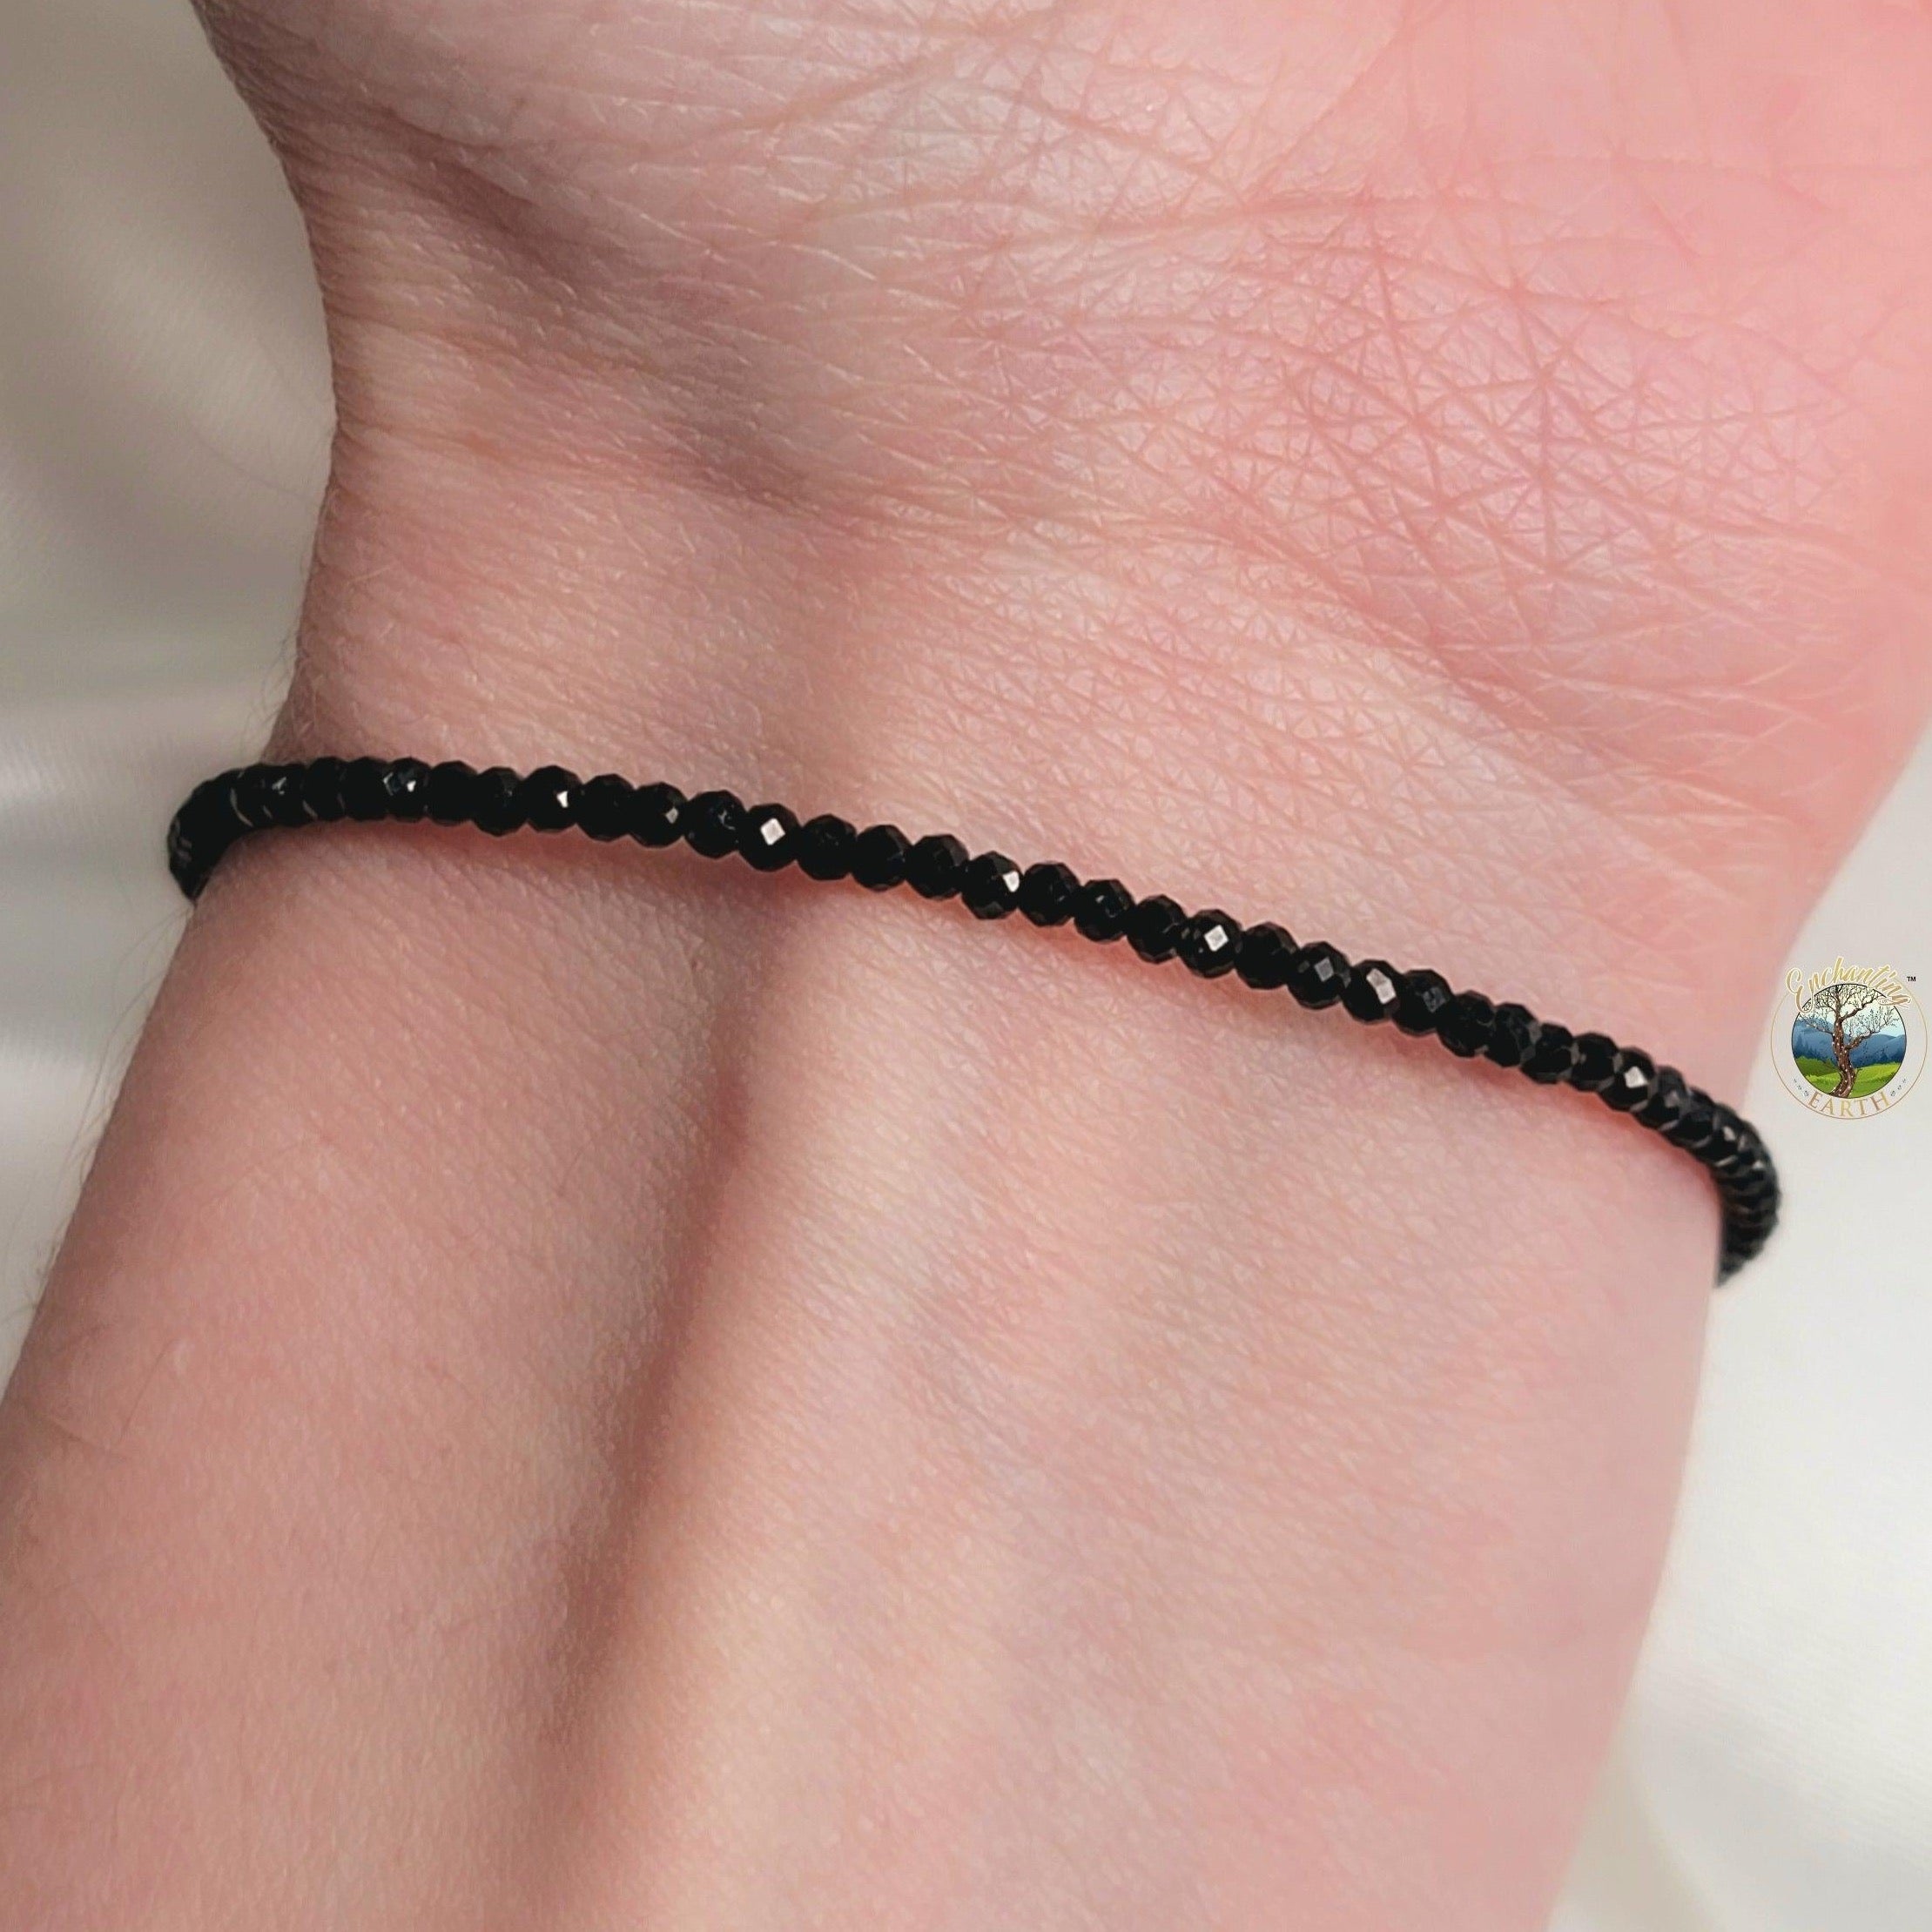 Black Tourmaline Micro Faceted Bracelet for Protection & Purification